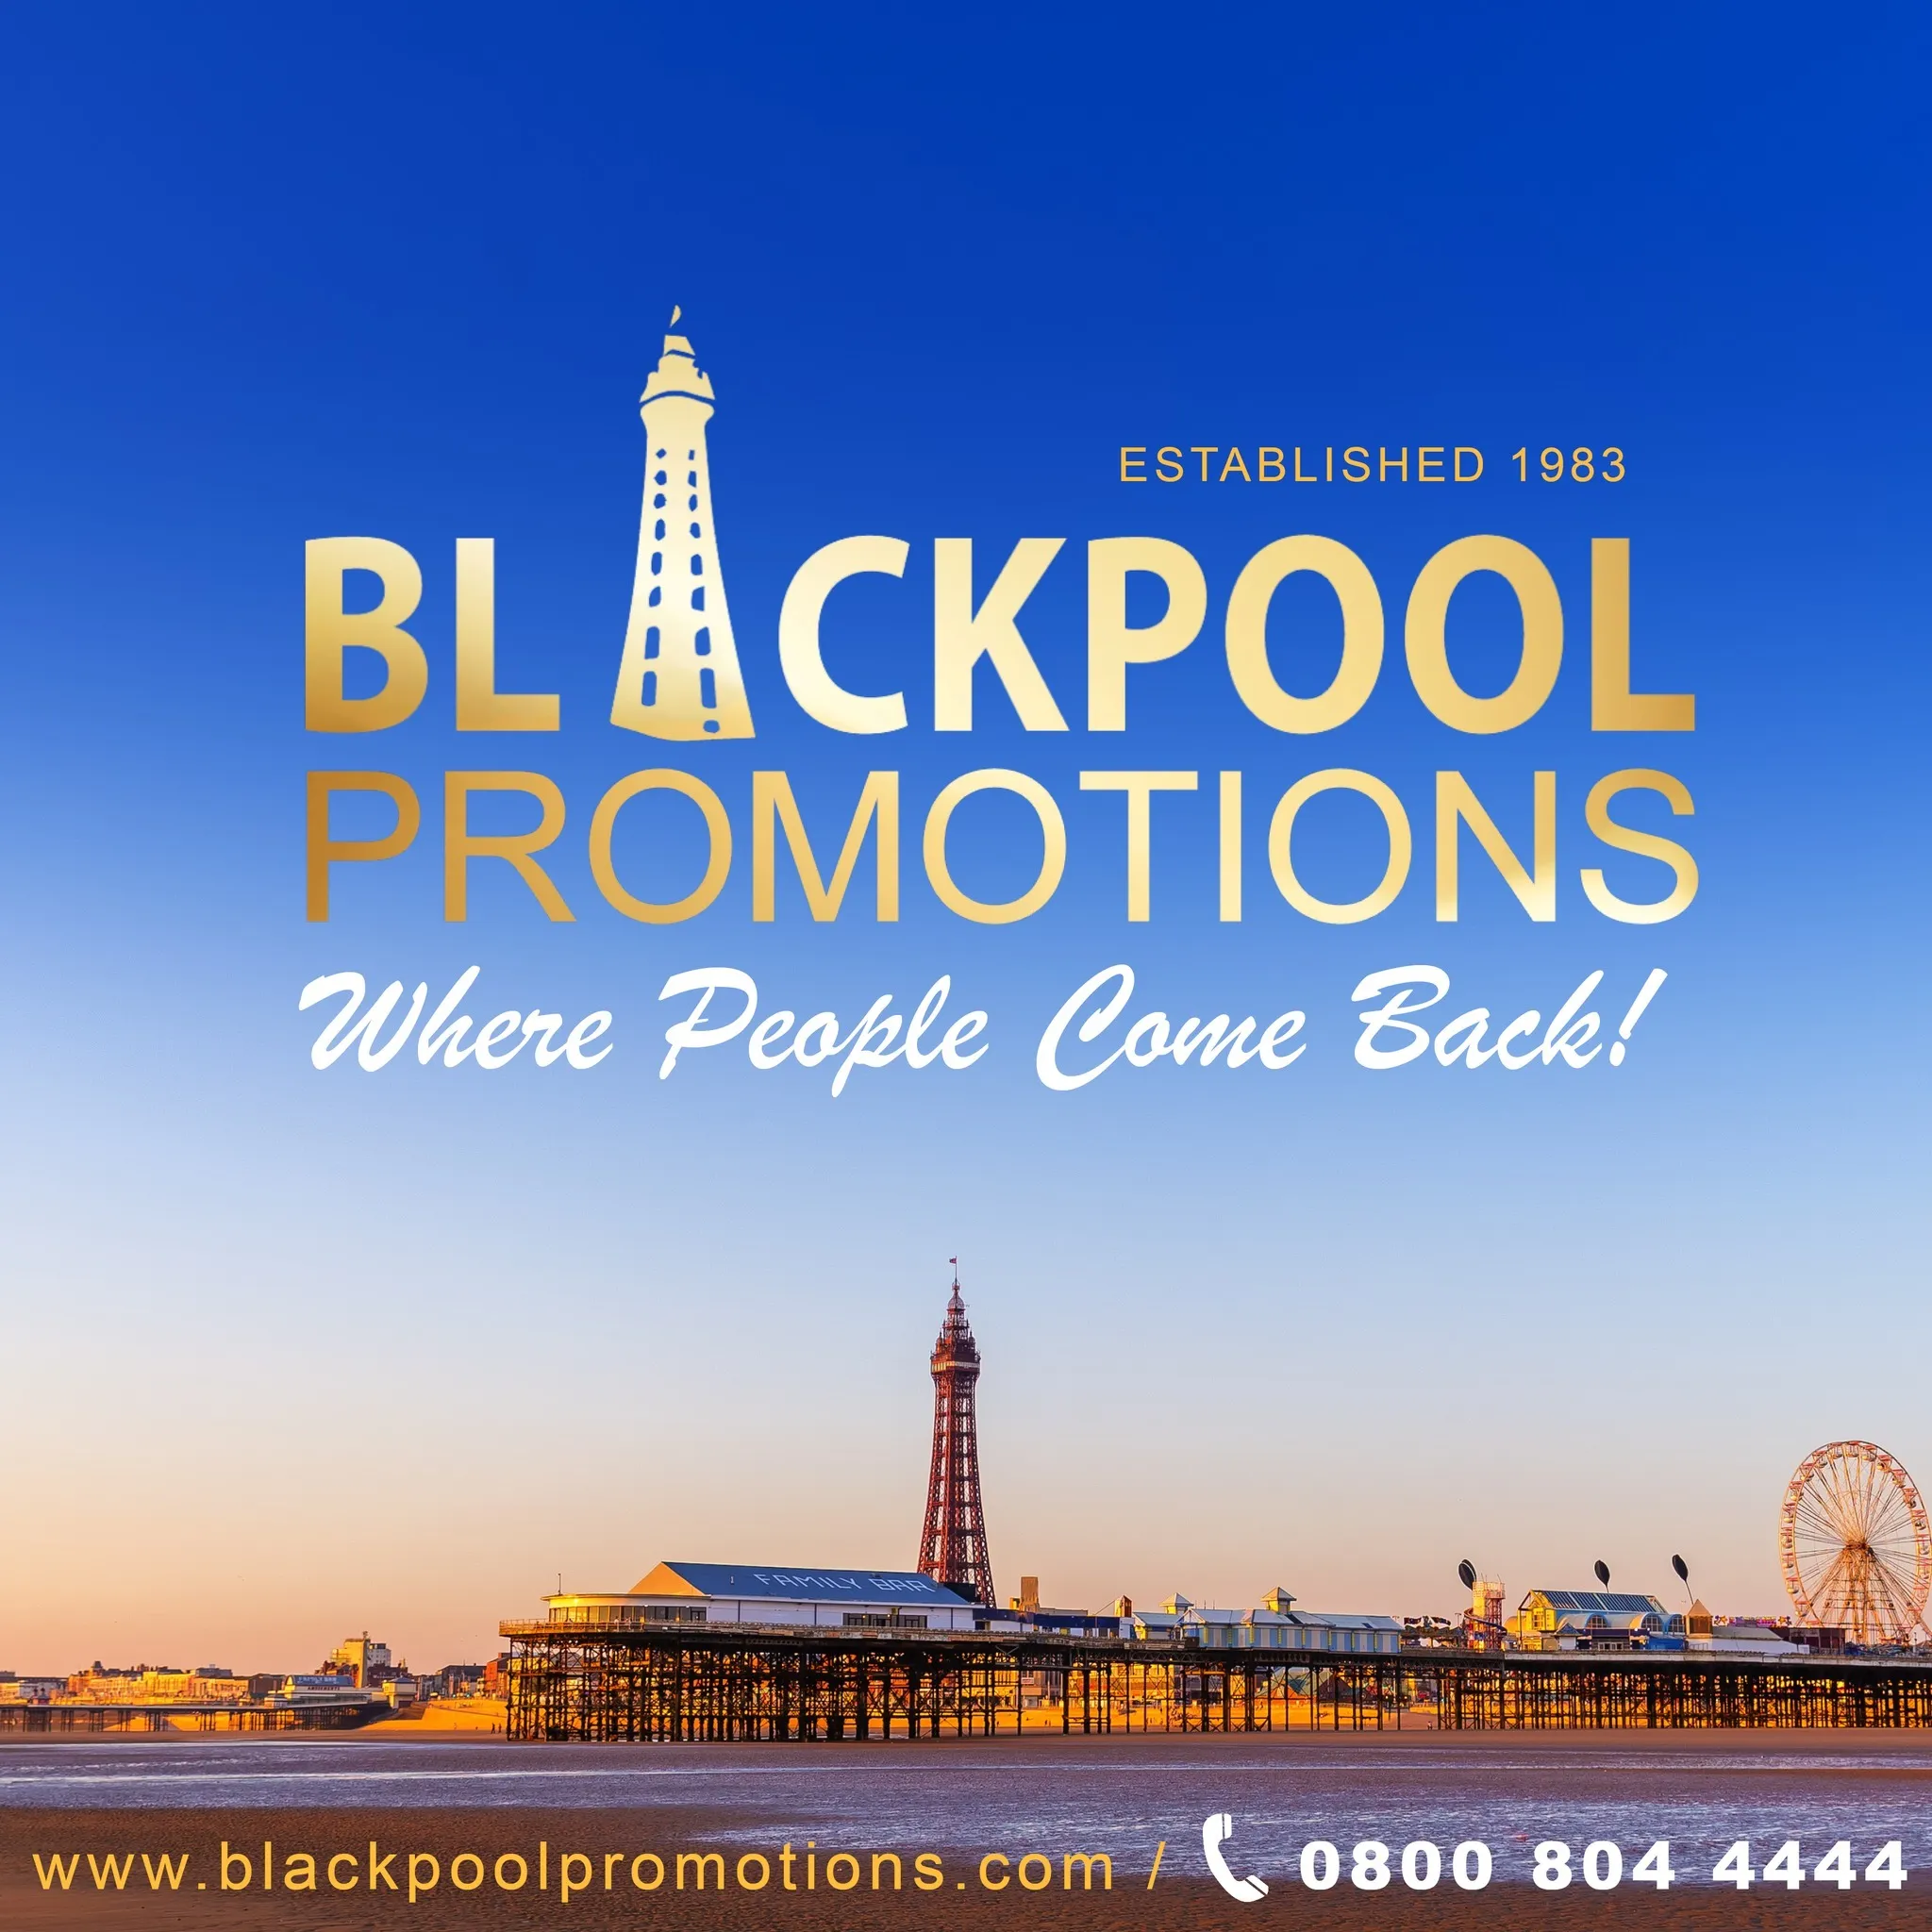  Blackpool Promotions Promo Code